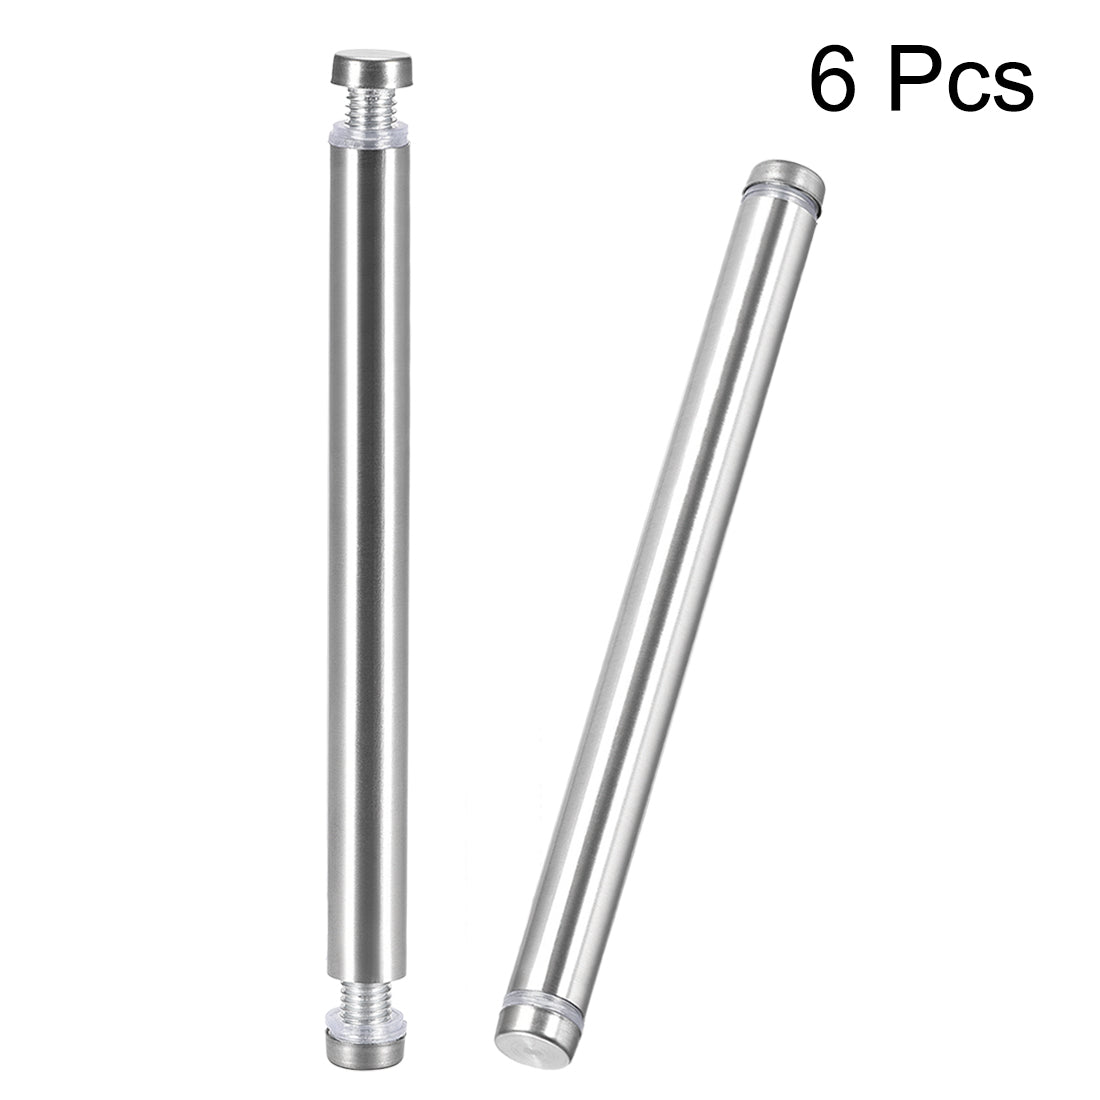 uxcell Uxcell Glass Standoff Double Head Stainless Steel Standoff Holder 12mm x 144mm 6 Pcs